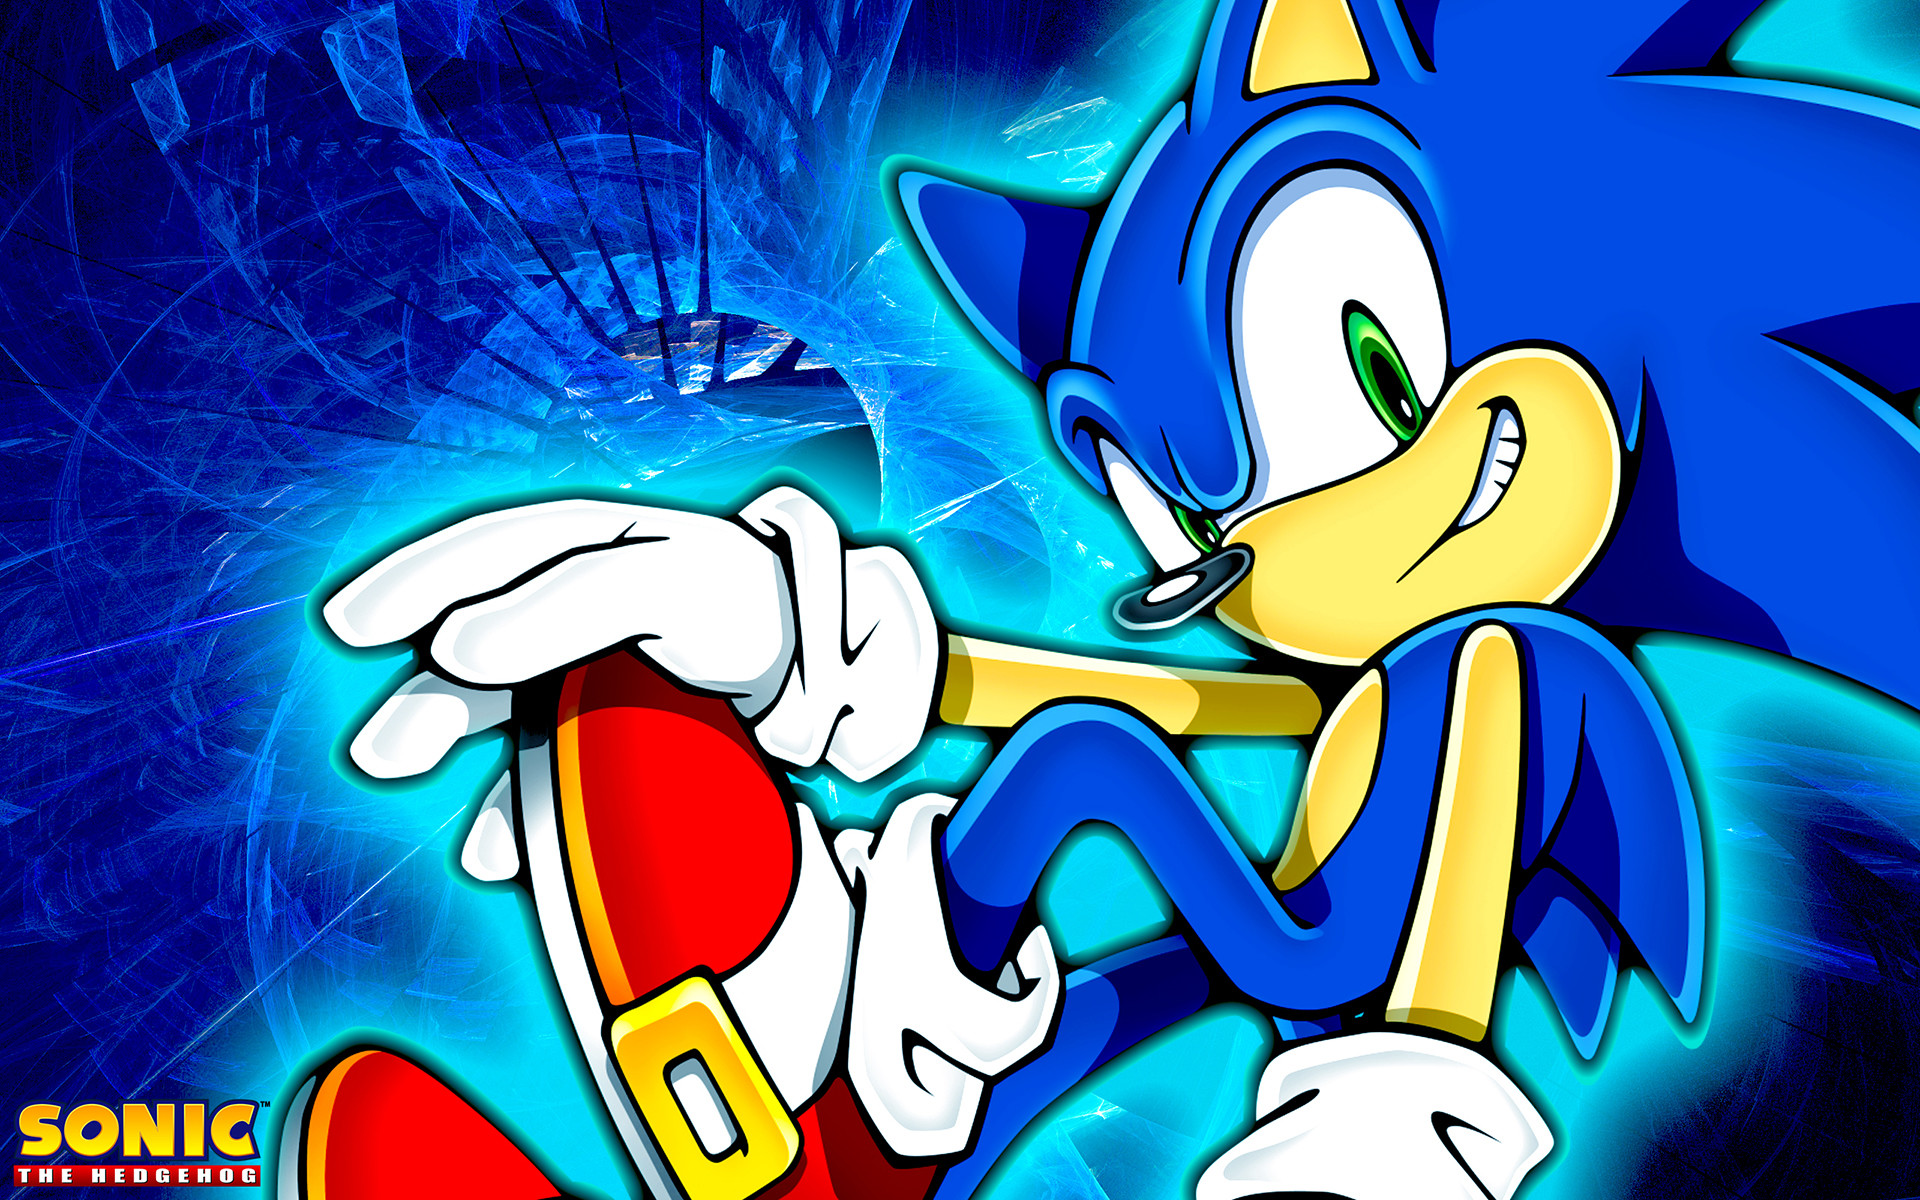 1920x1200 Sonic The Hedgehog Wallpaper by SonicTheHedgehogBG Sonic The Hedgehog  Wallpaper by SonicTheHedgehogBG